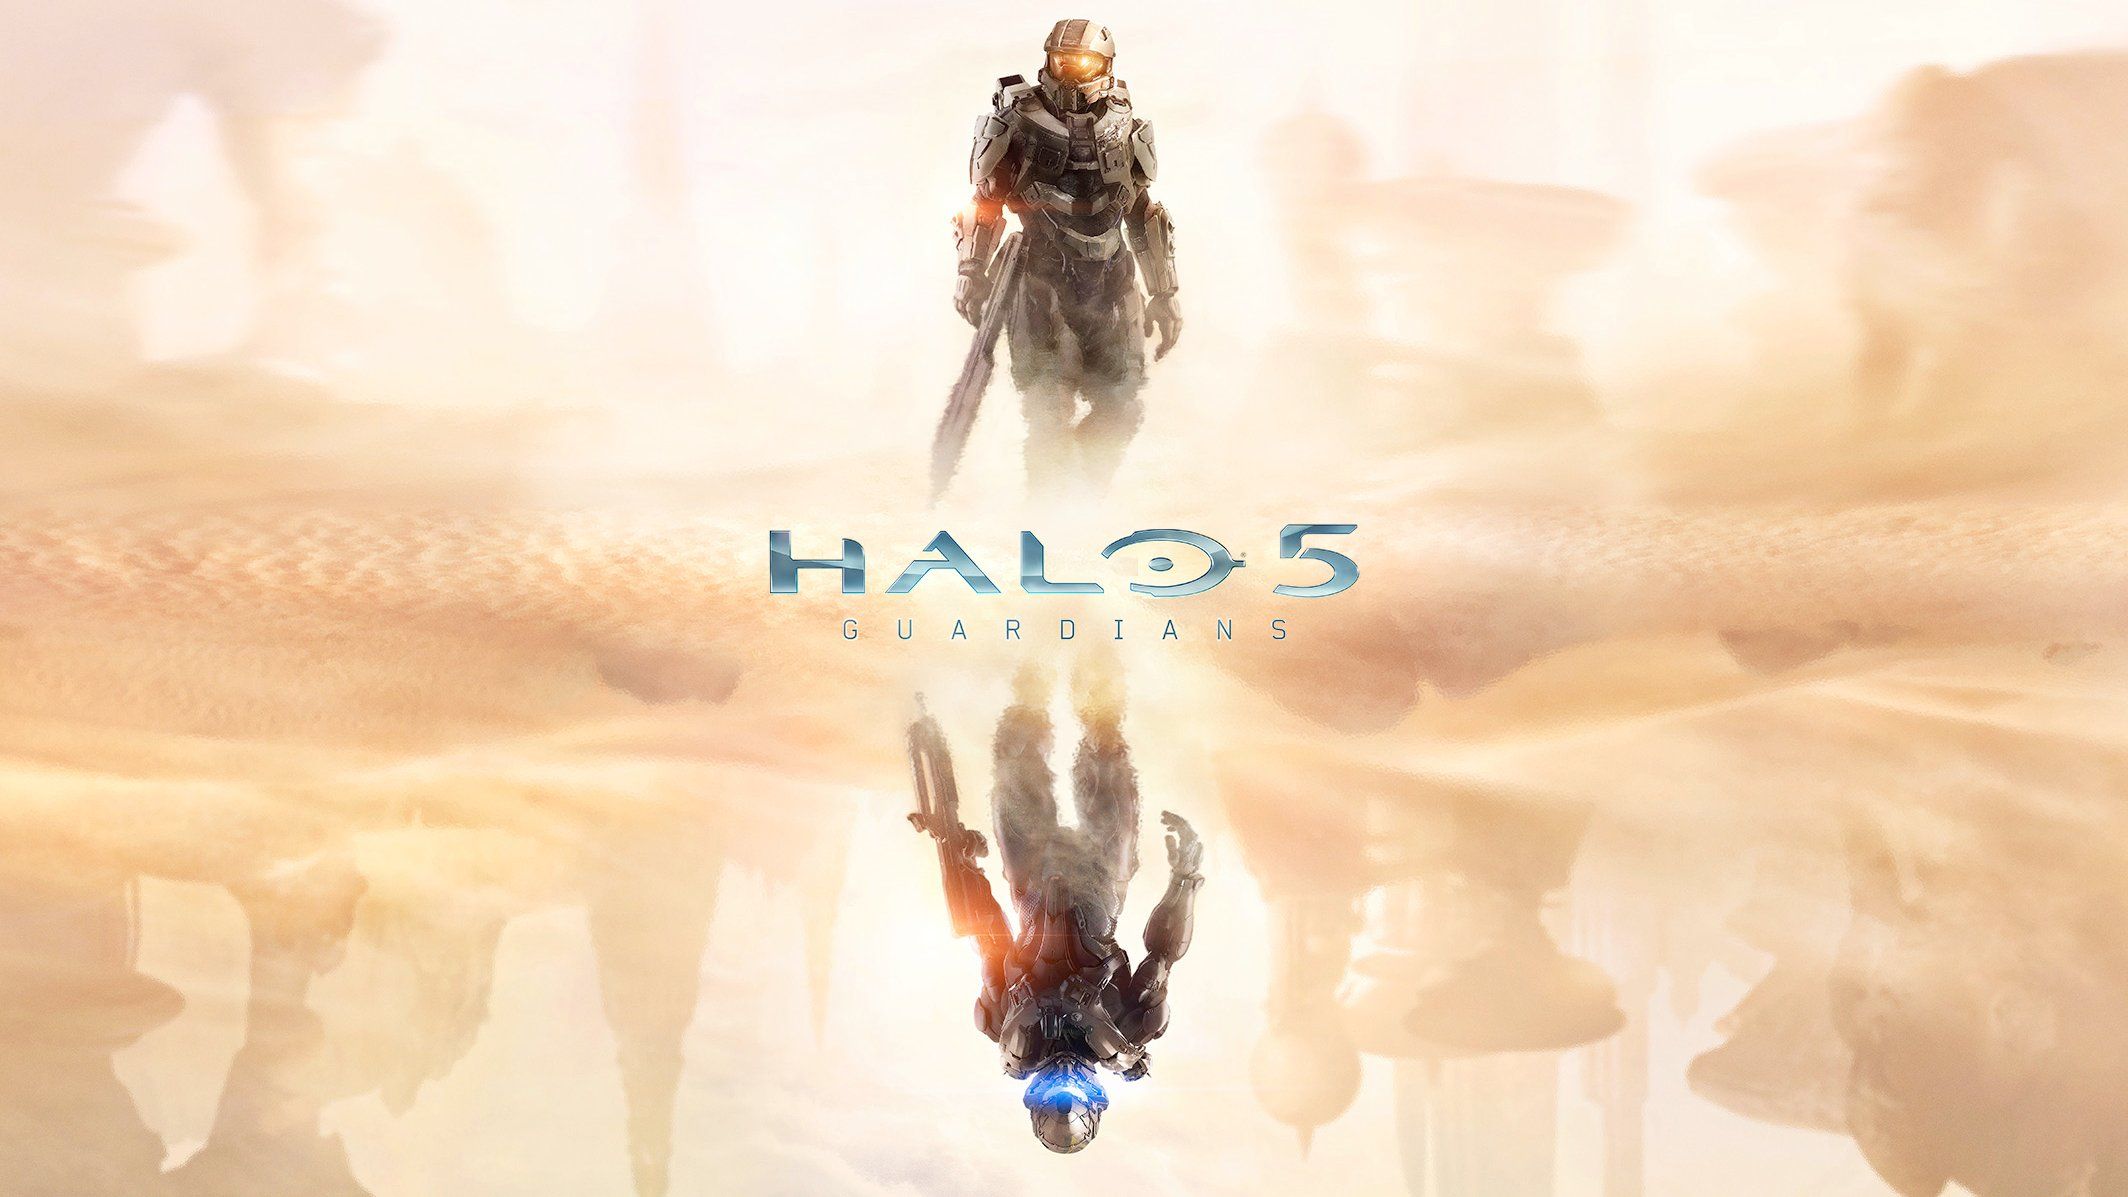 HALO 5 GUARDIANS shooter fps action fighting warrior sci-fi ...